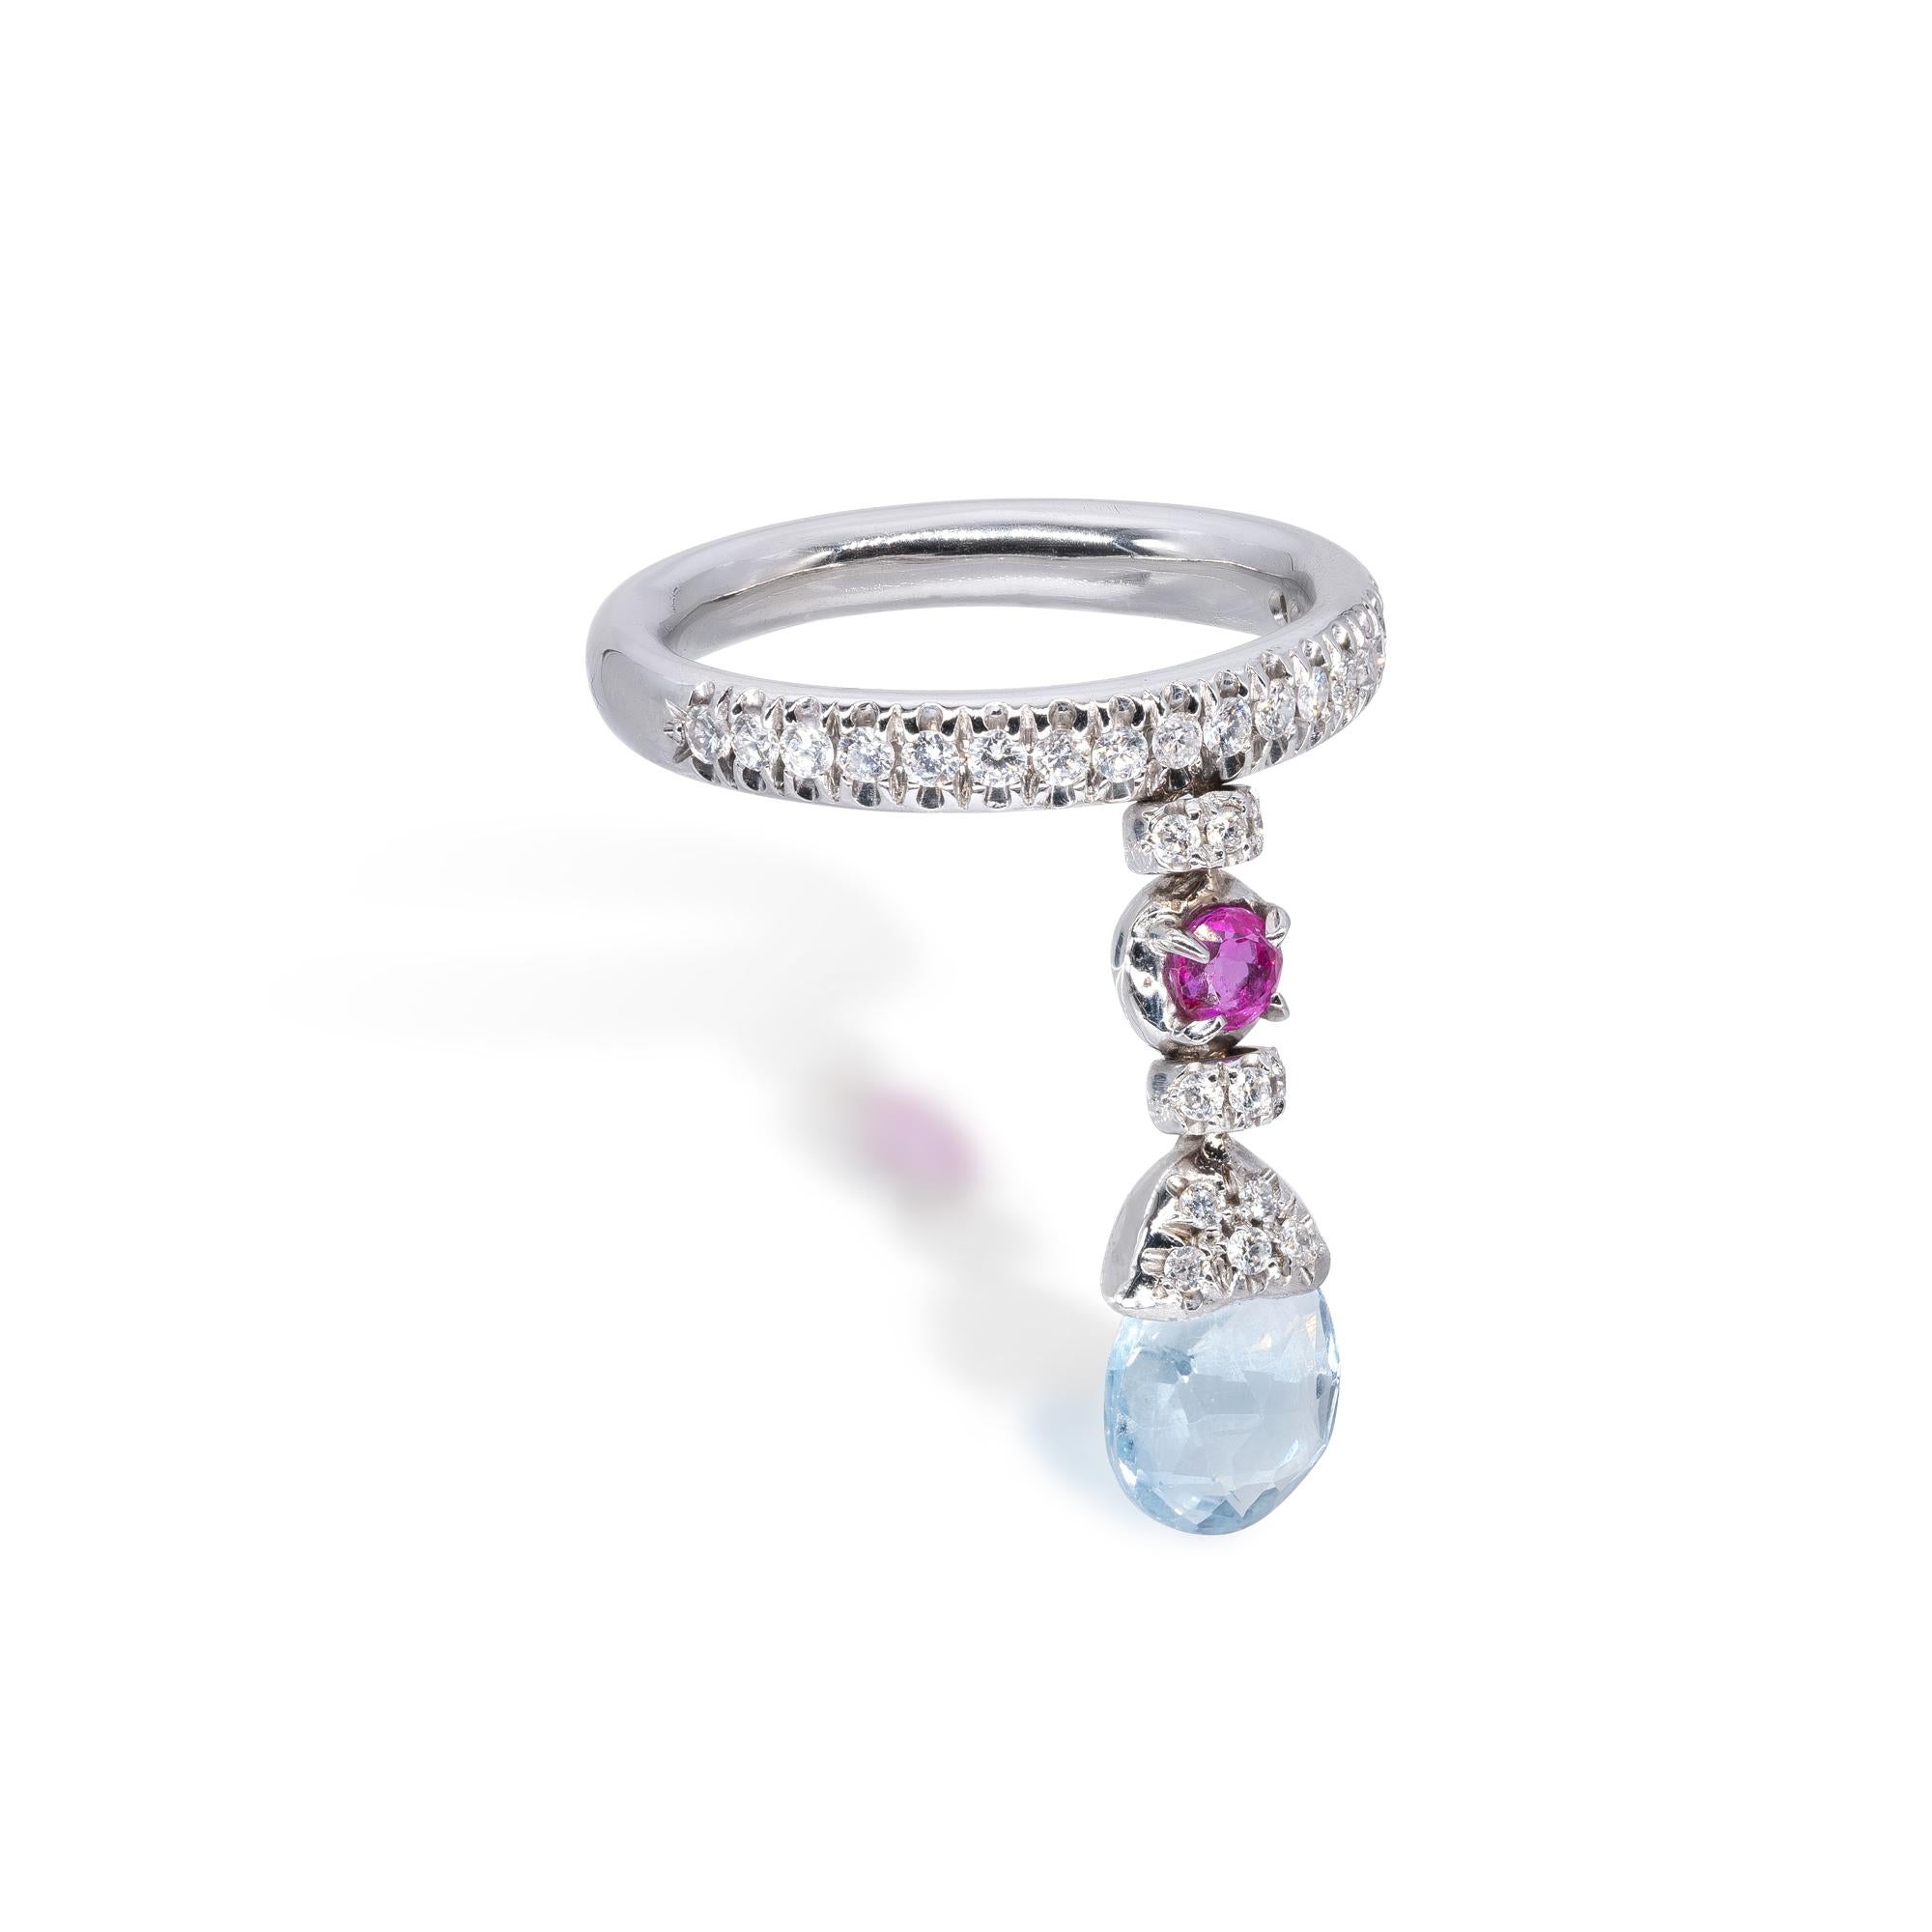 d’Avossa Ring in 18 kt white gold with a 2,38 cts round-briolé cut Blue Topaz and a 0,27 cts pink Sapphire pendants, enriched with white Diamonds G color, VVS1 clarity 0,44 cts.

Ref. Number ATO742